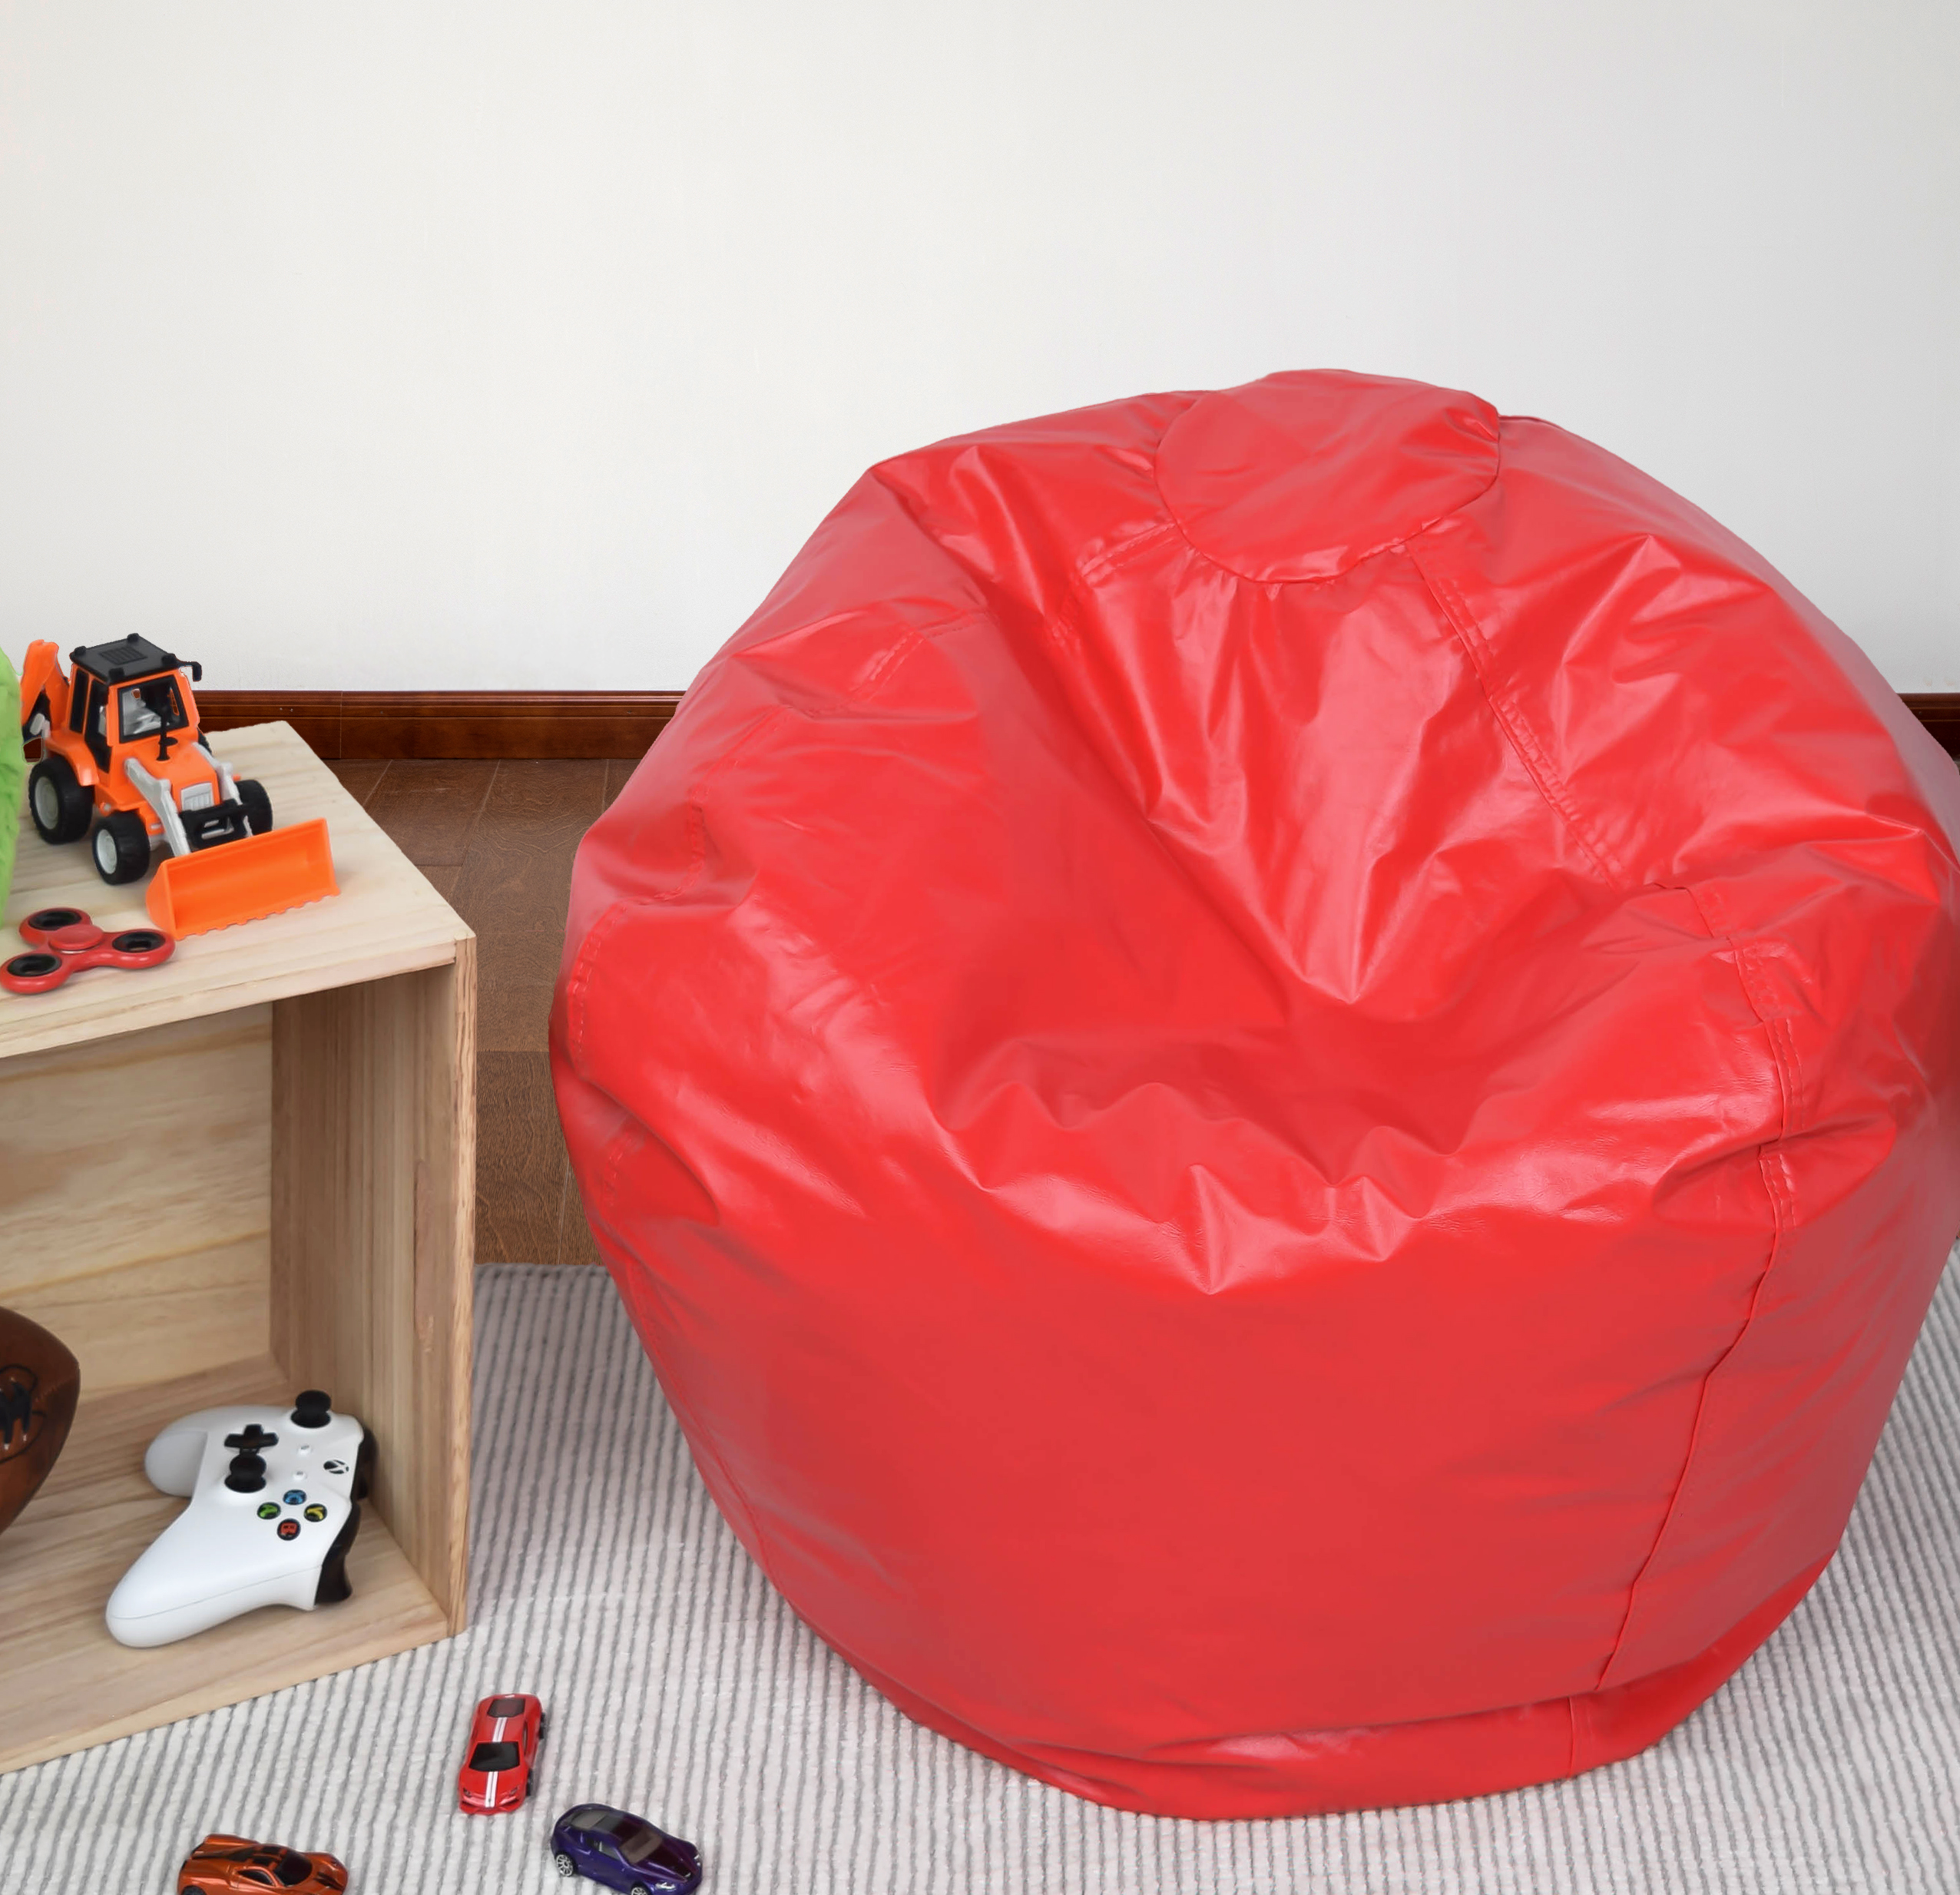 ACEssentials 96" Round Vinyl Matte Bean Bag, Available in Multiple Colors - image 2 of 3